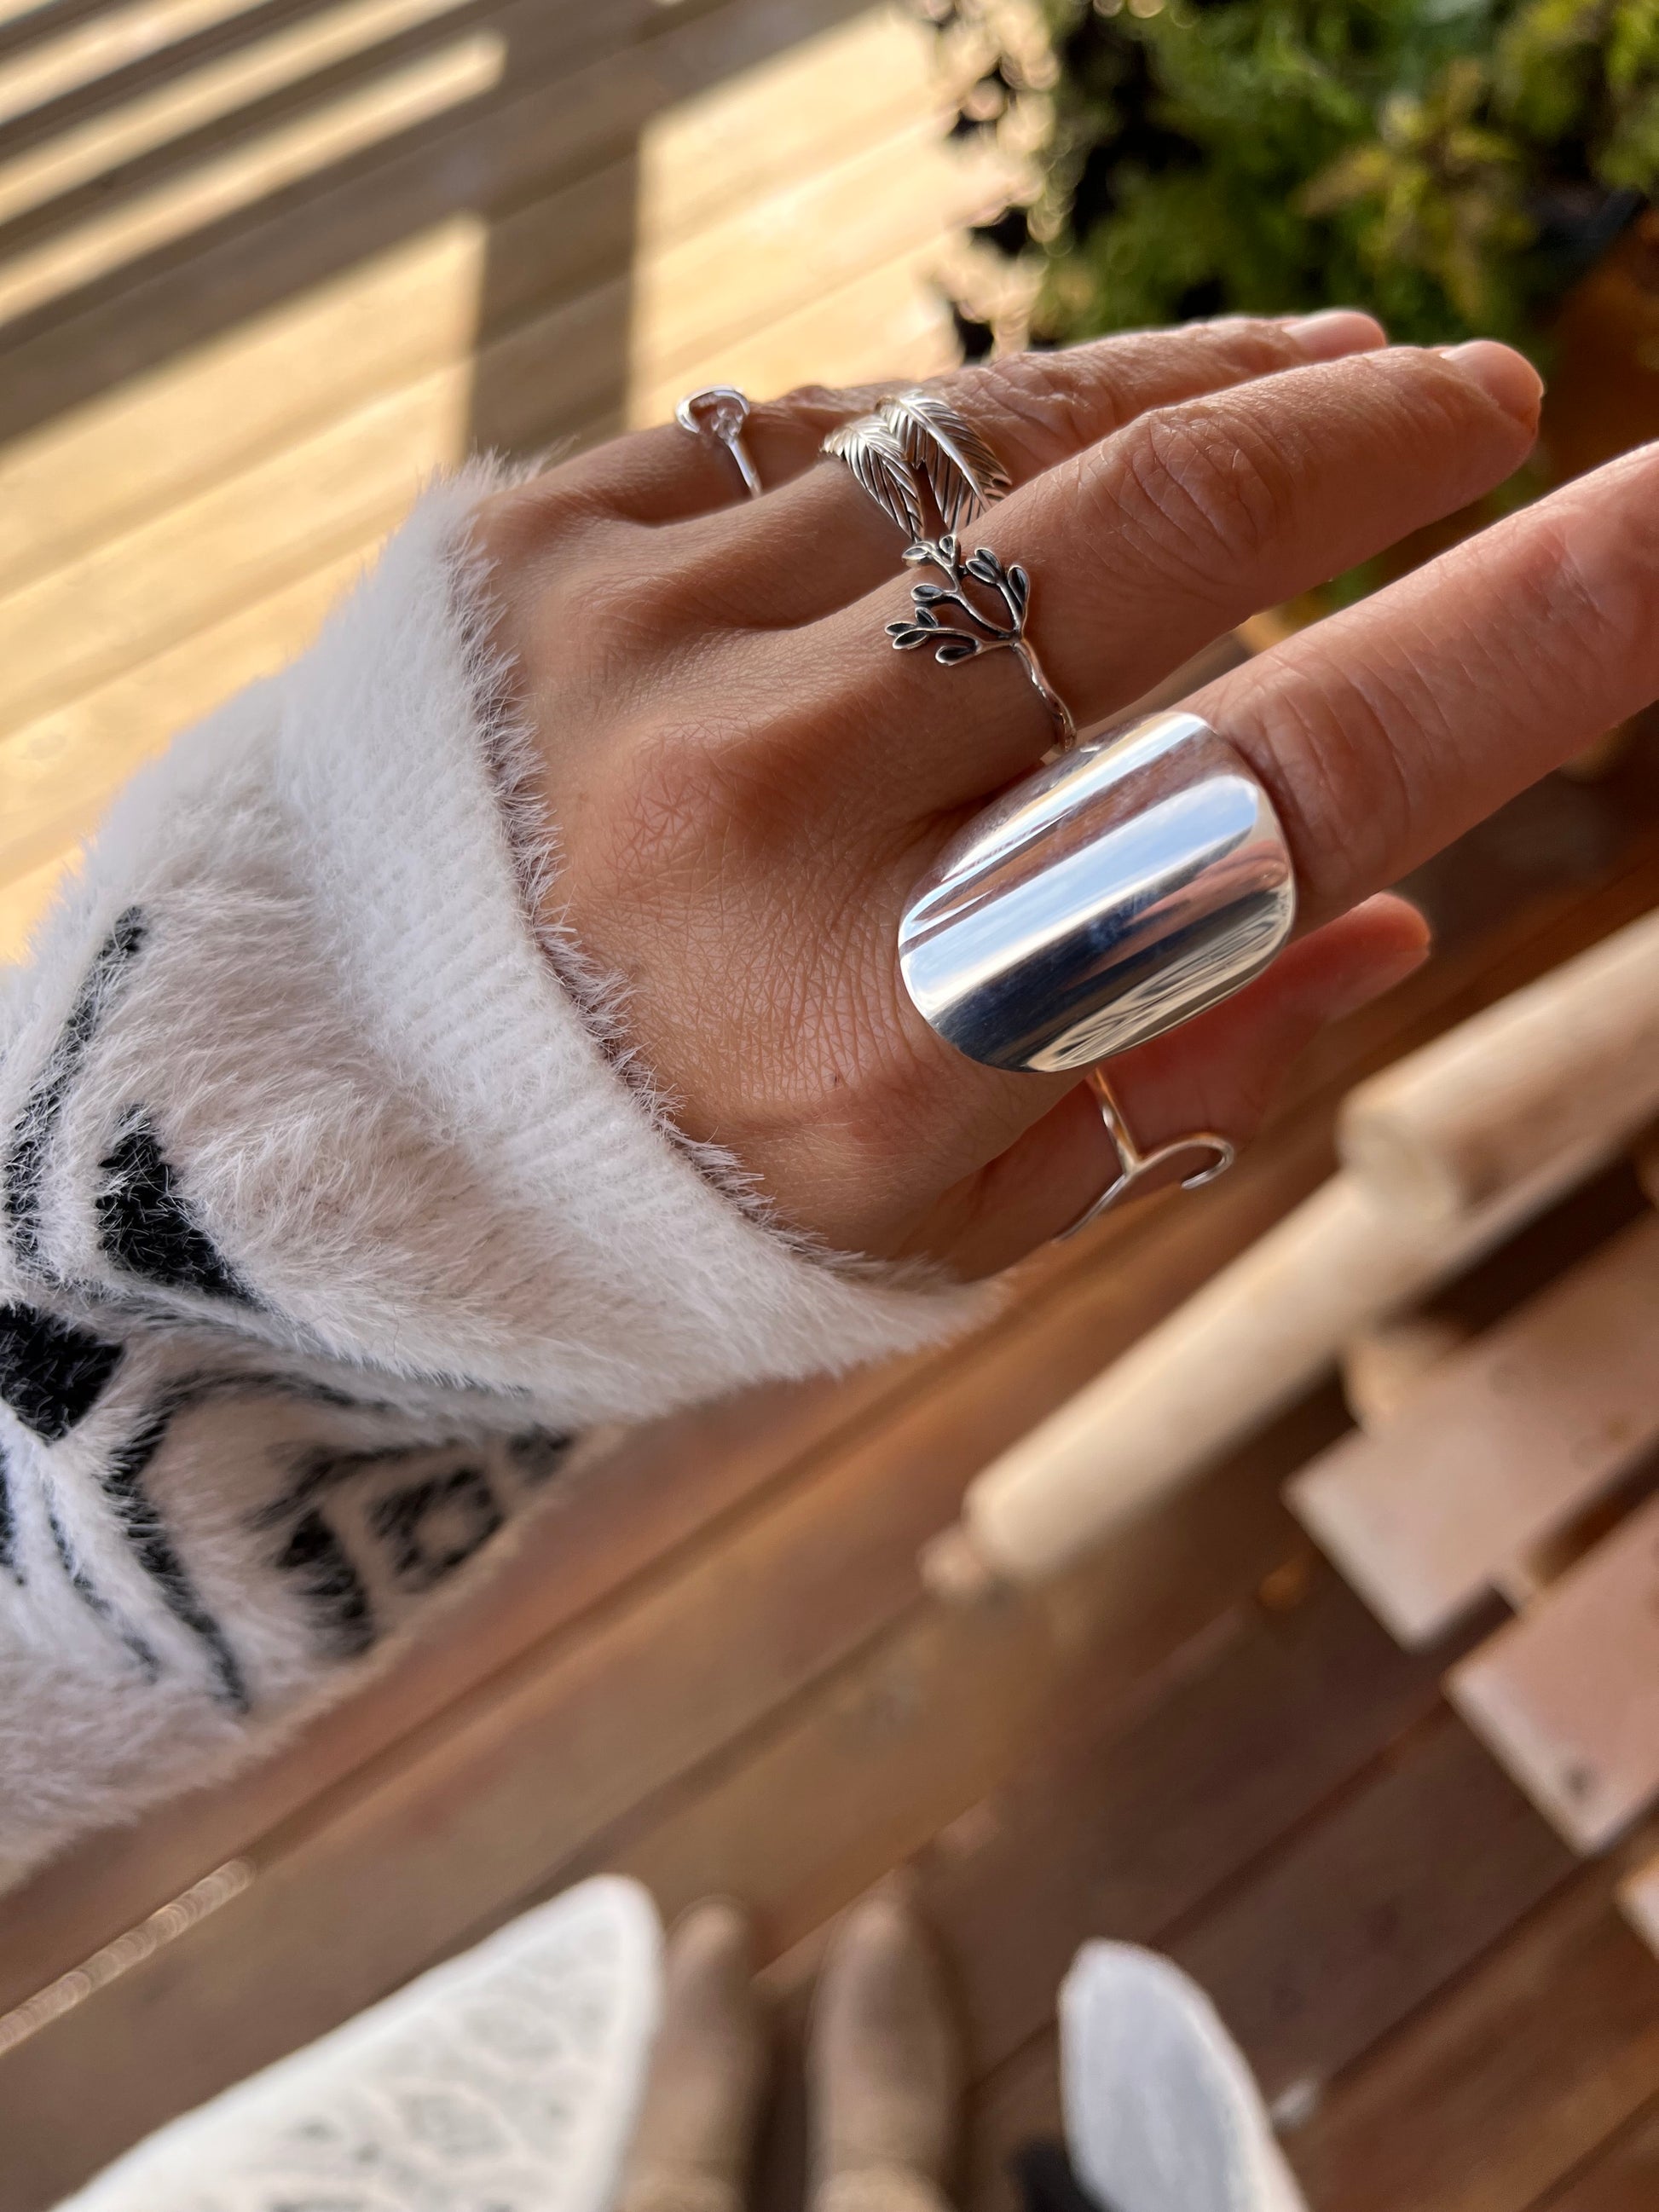 Disc ring, Silver Ring, Statement Rings,